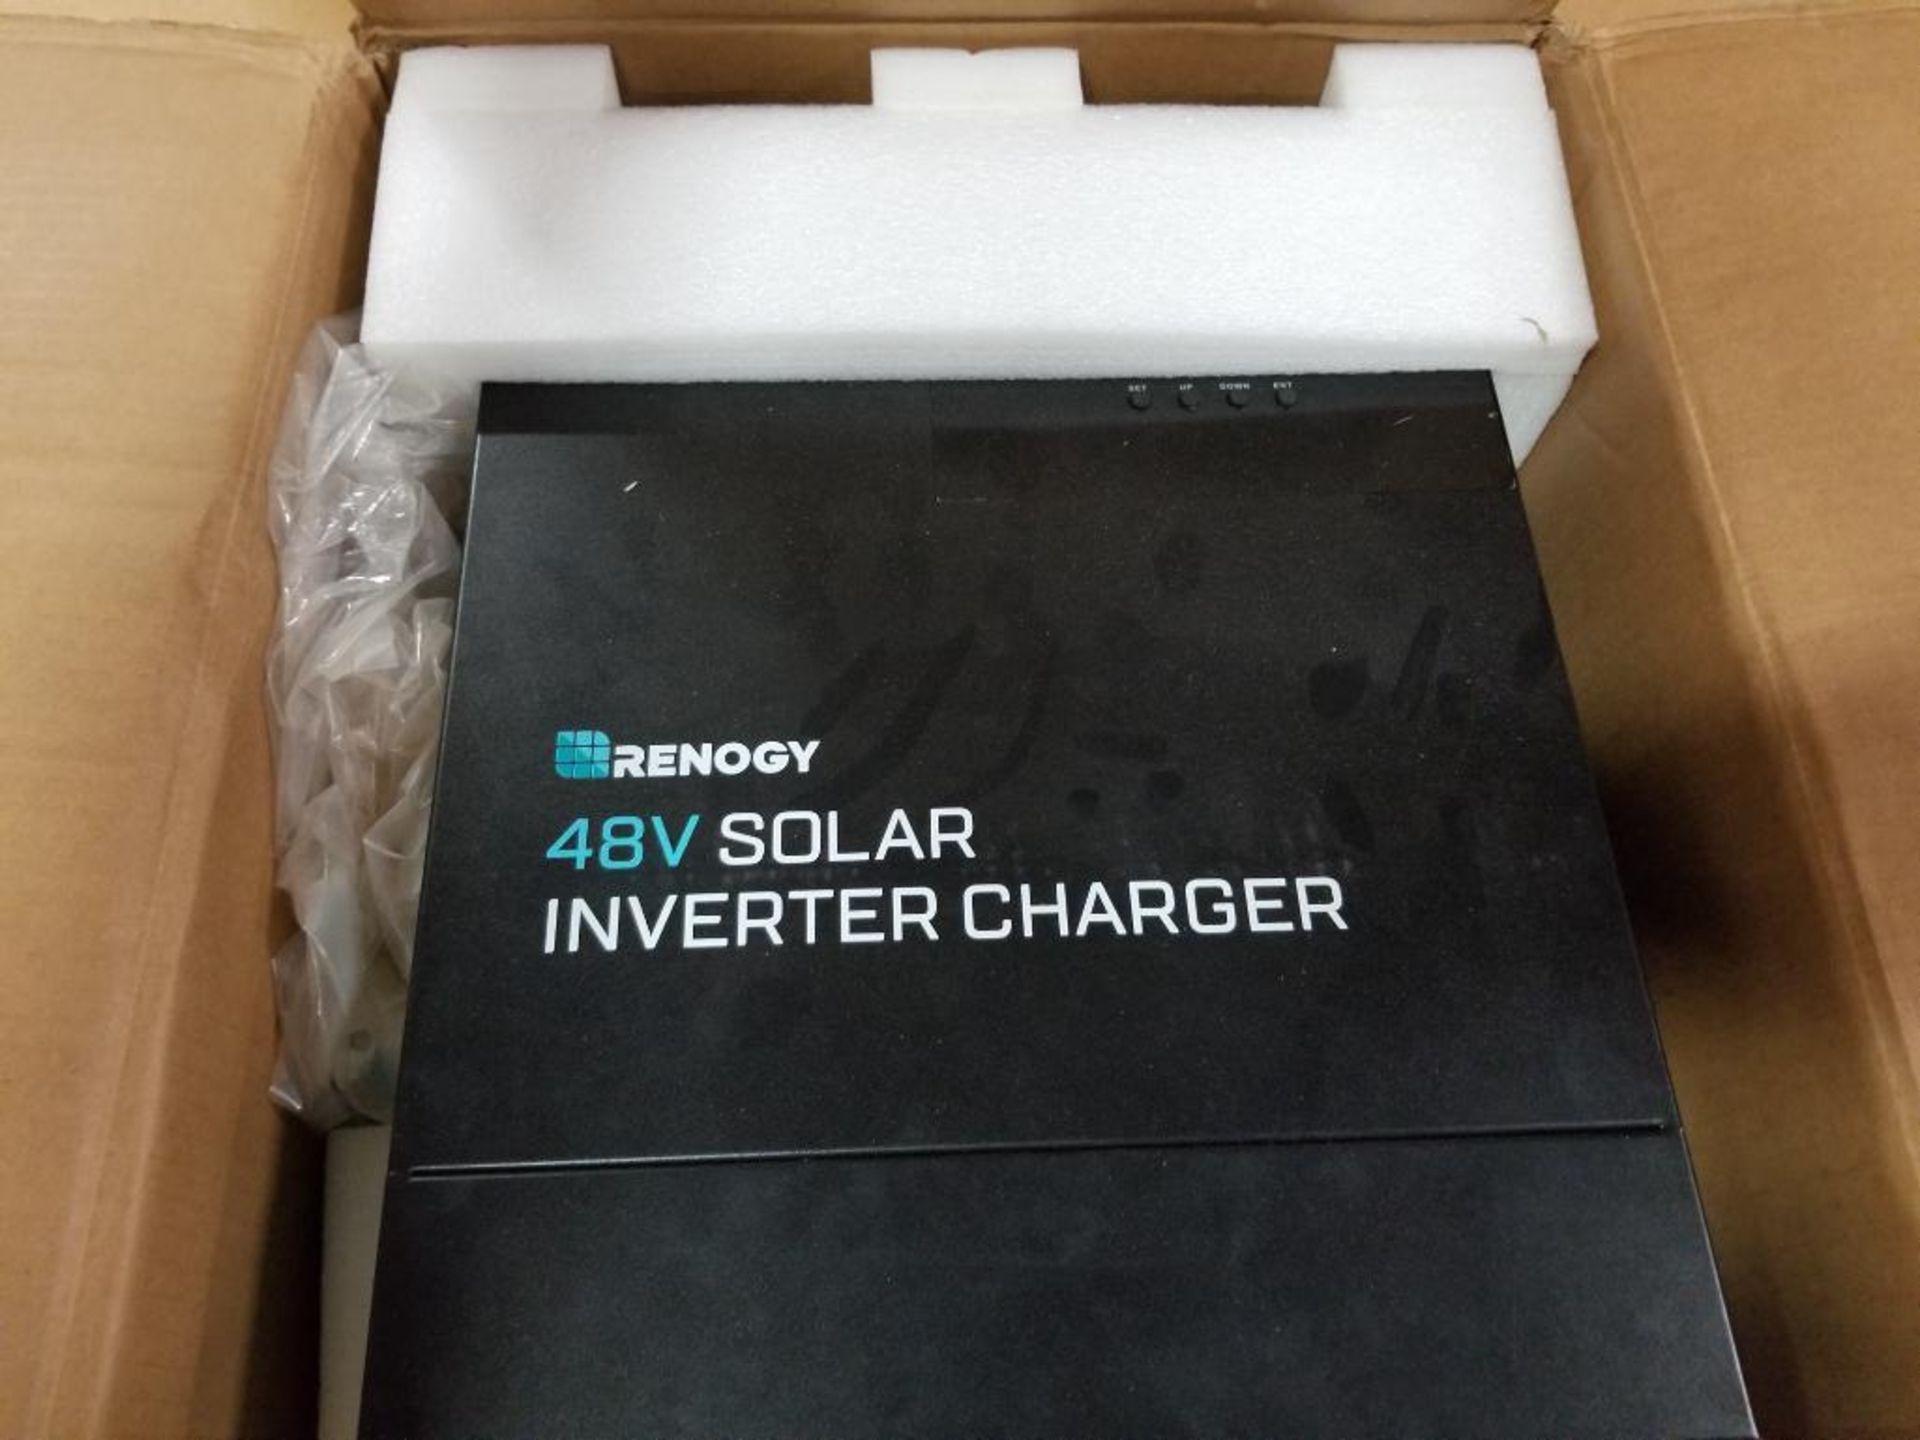 Renolgy solar inverter charger 48V 3500W. RIV4835CH1S-G2-US. - Image 8 of 8